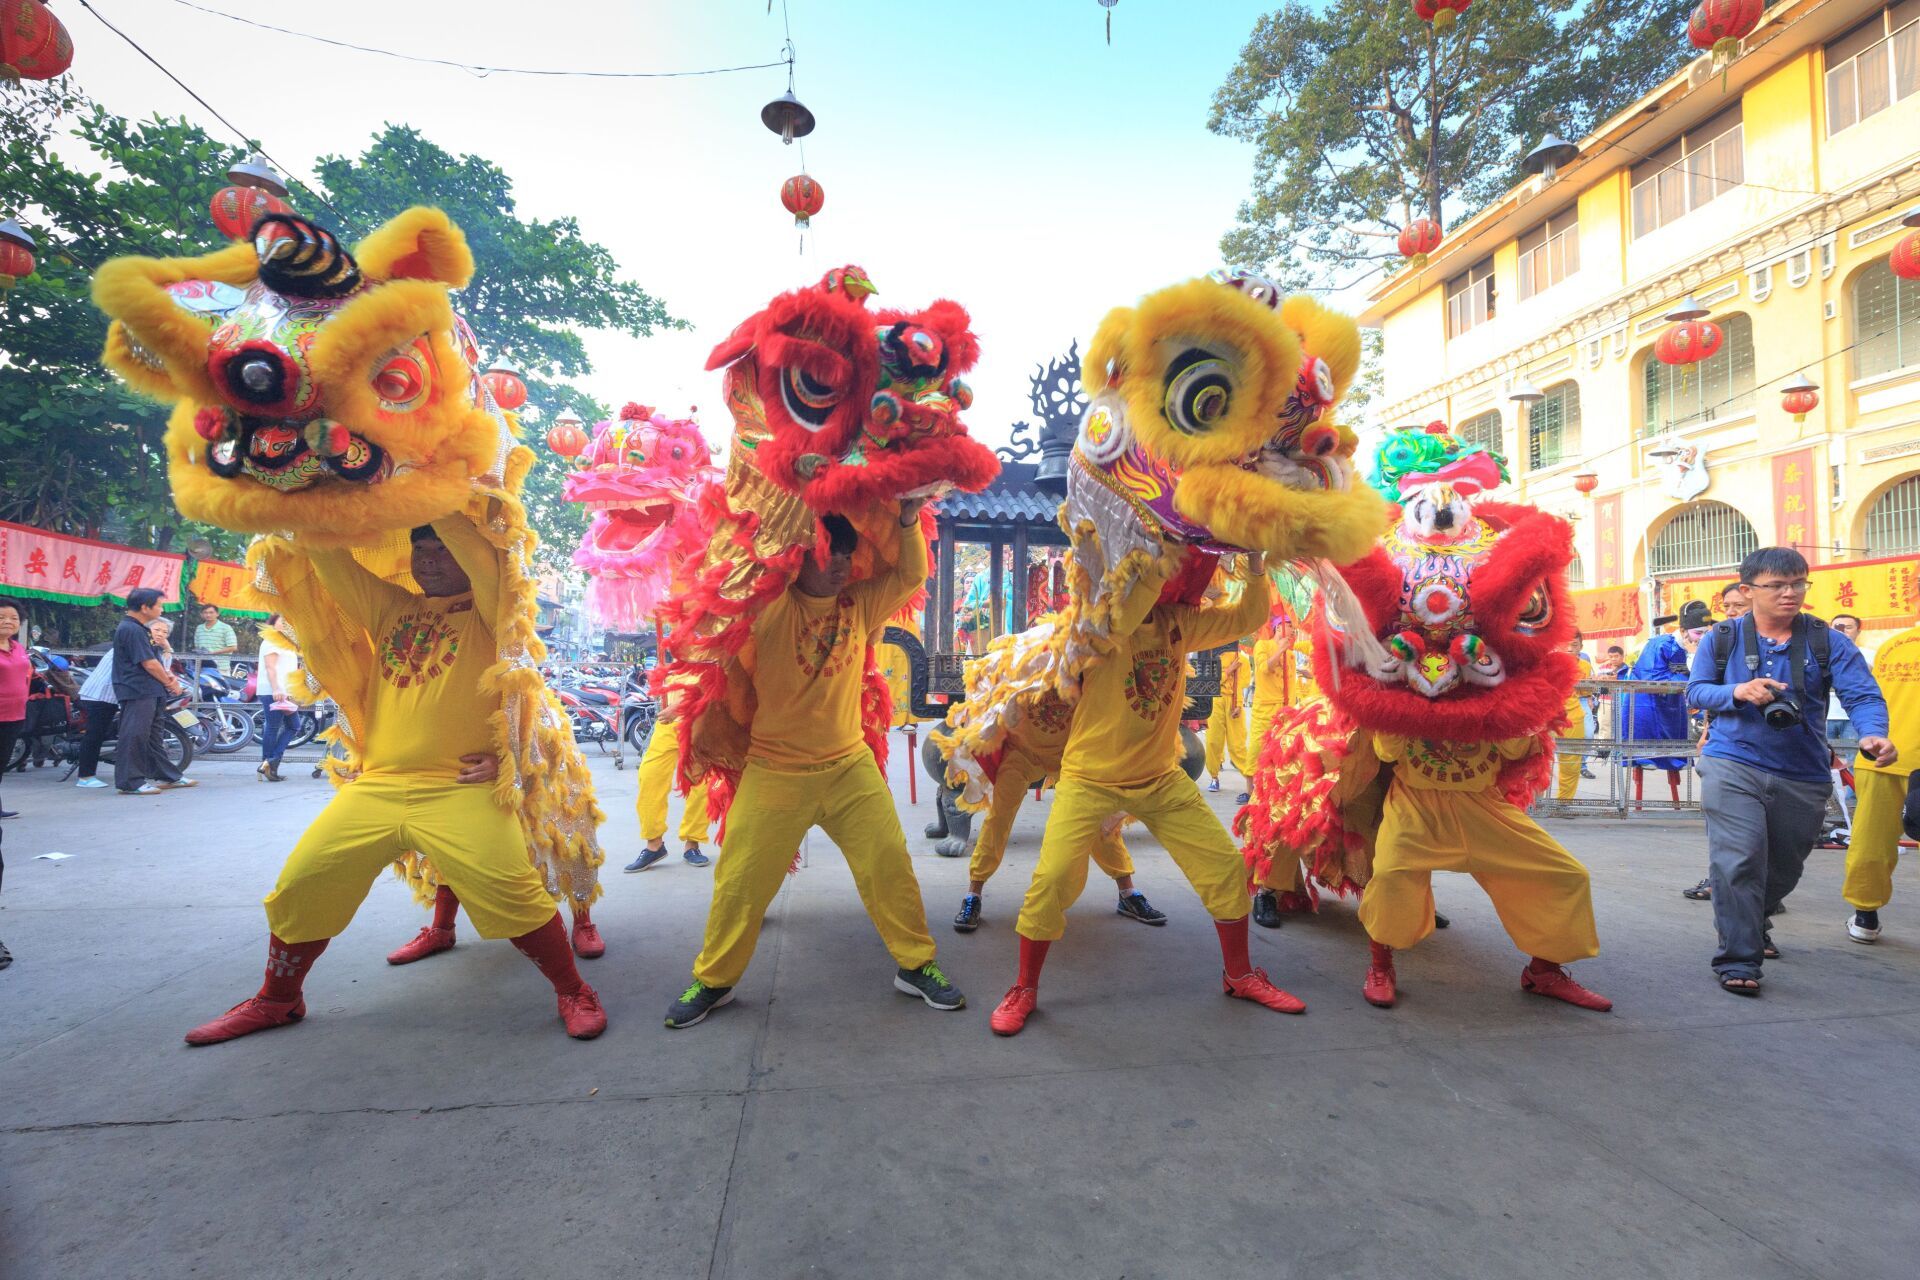 A group of people dressed as lions are dancing on a street.